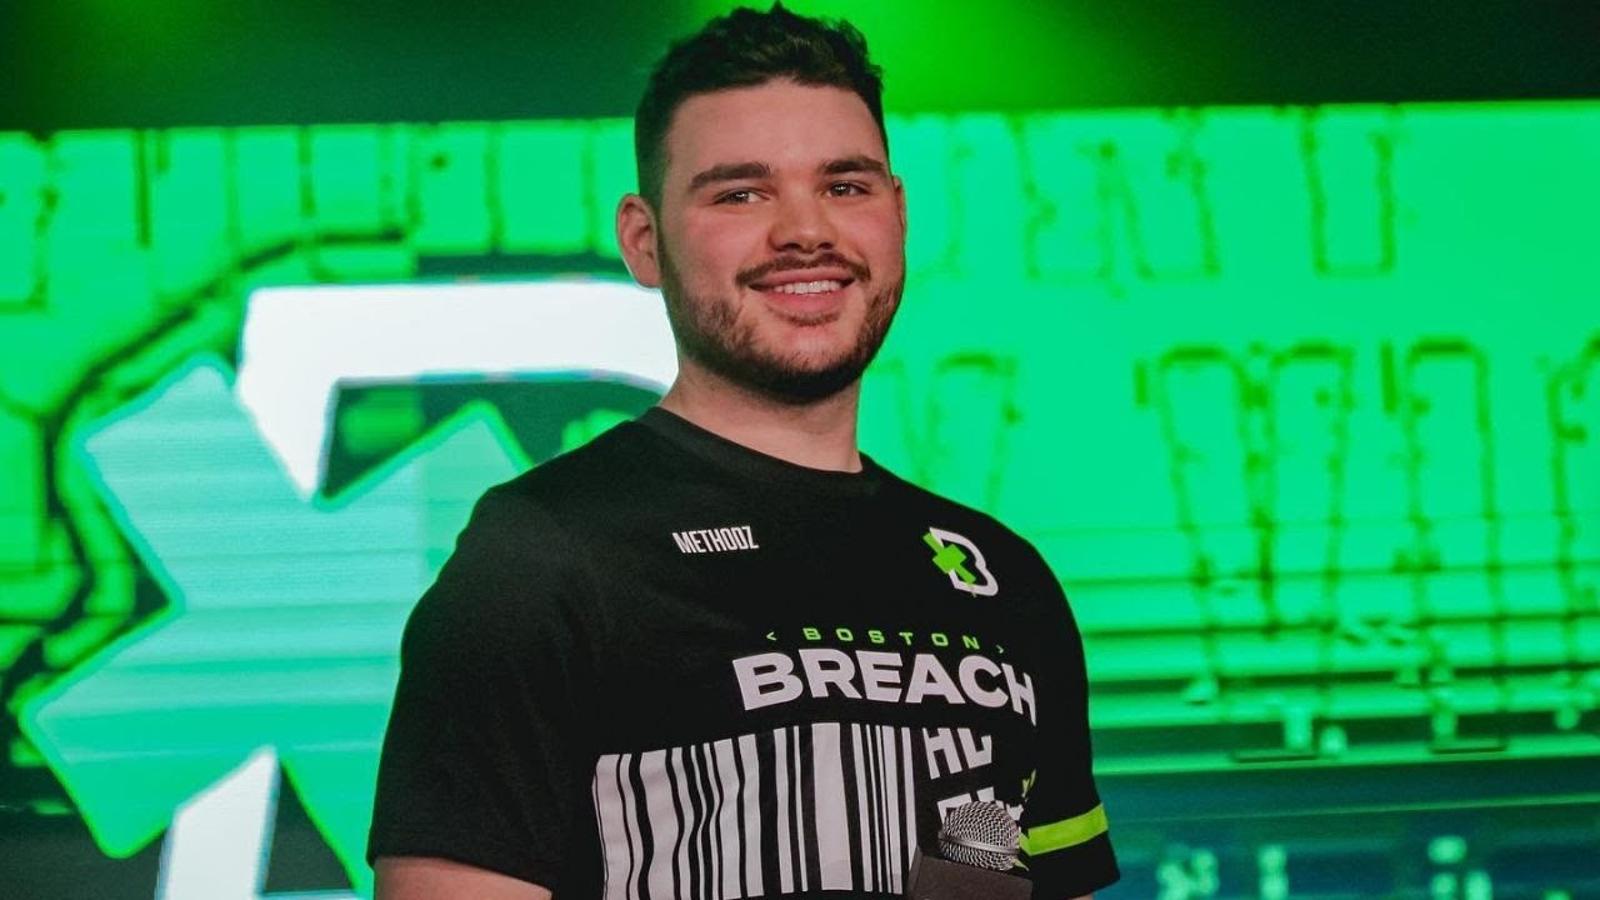 Methodz on stage representing Boston Breach in the CDL.